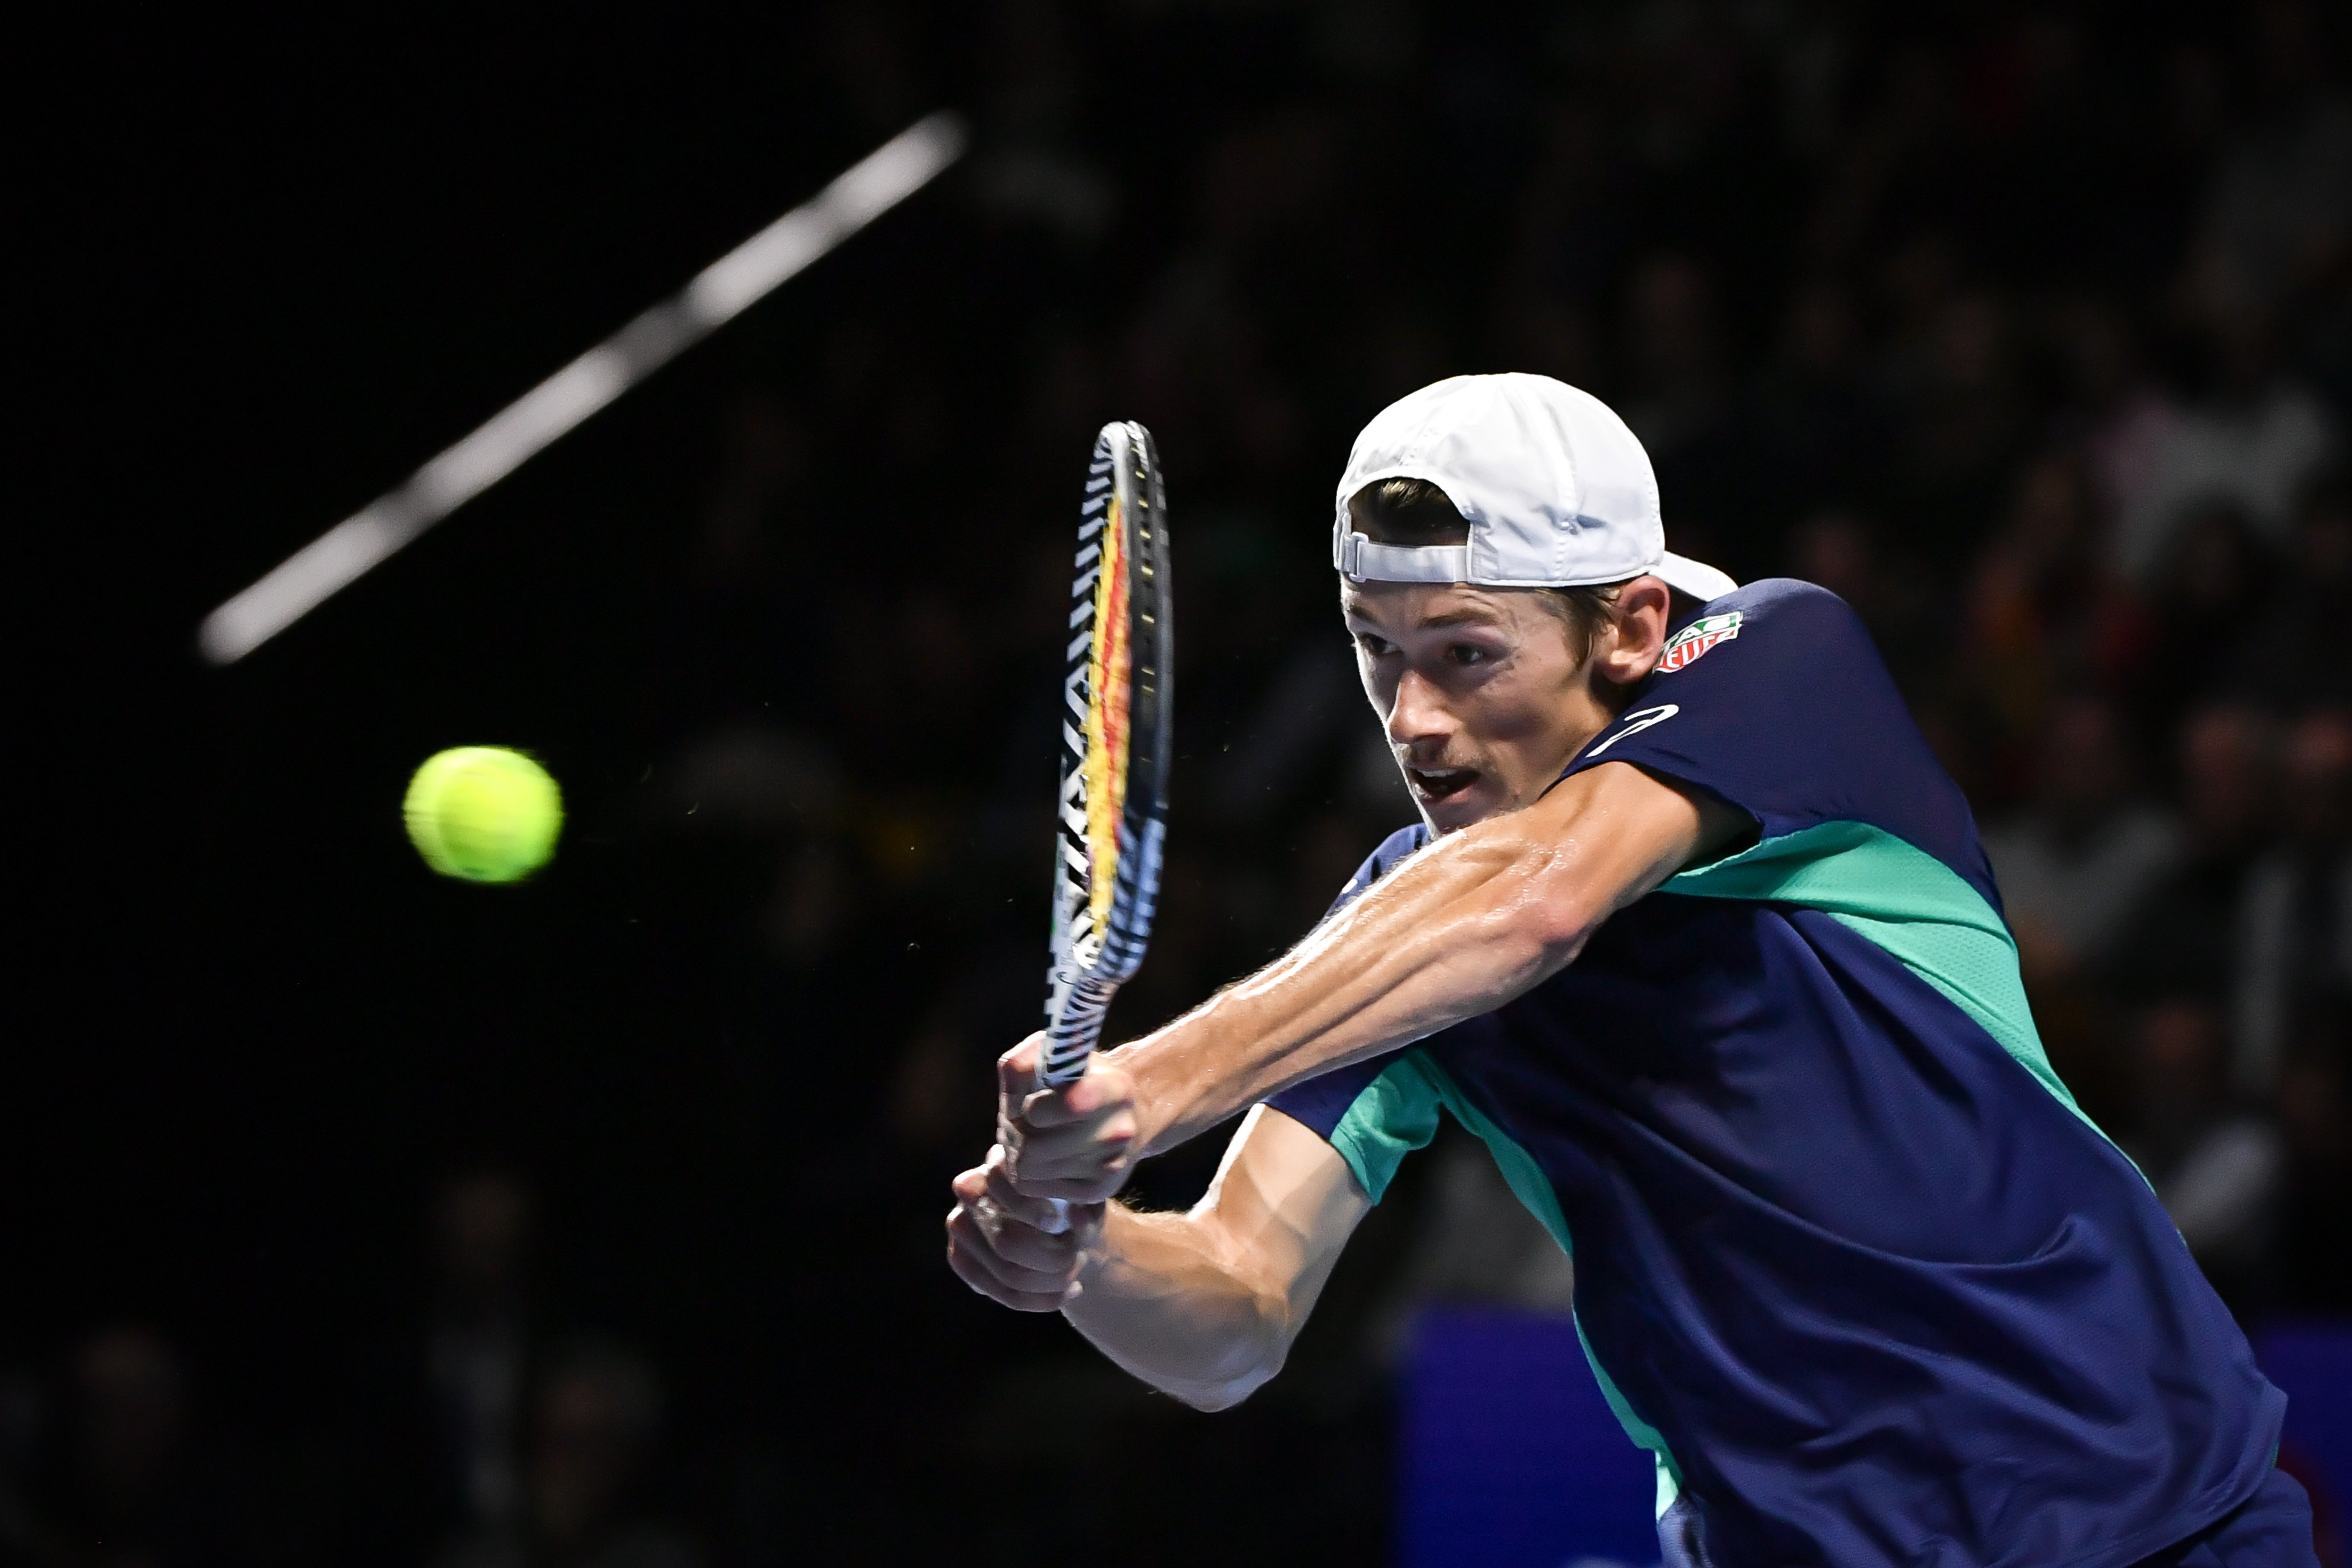 Next Gen ATP Finals Preview Could this year's winner make a '20 leap